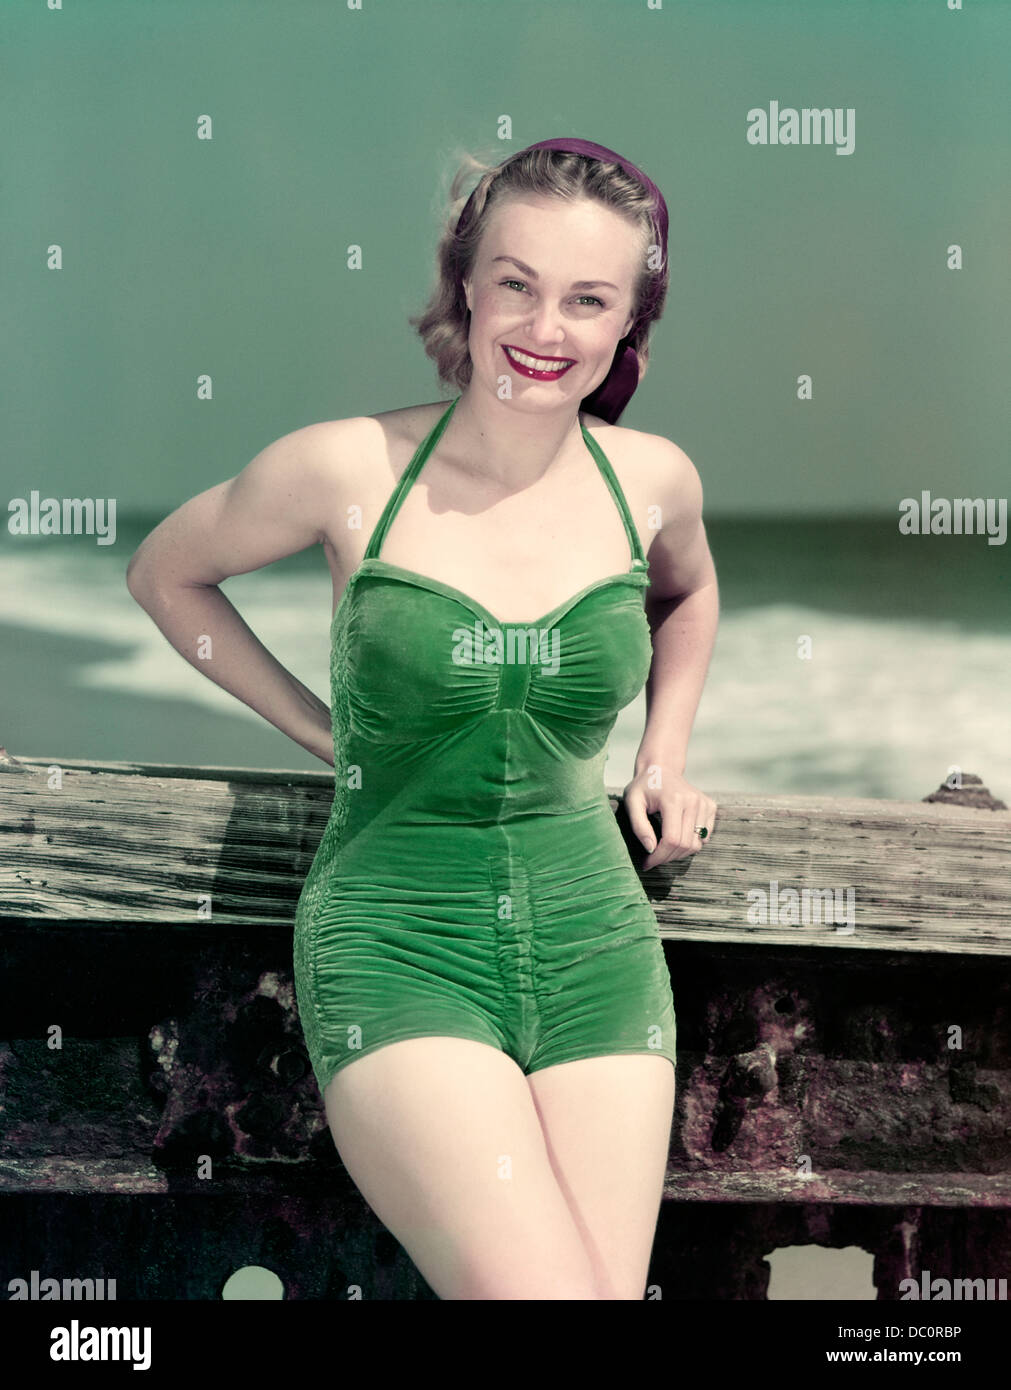 1940 YOUNG SMILING WOMAN WEARING GREEN VELVET MAILLOT DE POSING LEANING ON DIVING BOARD Banque D'Images